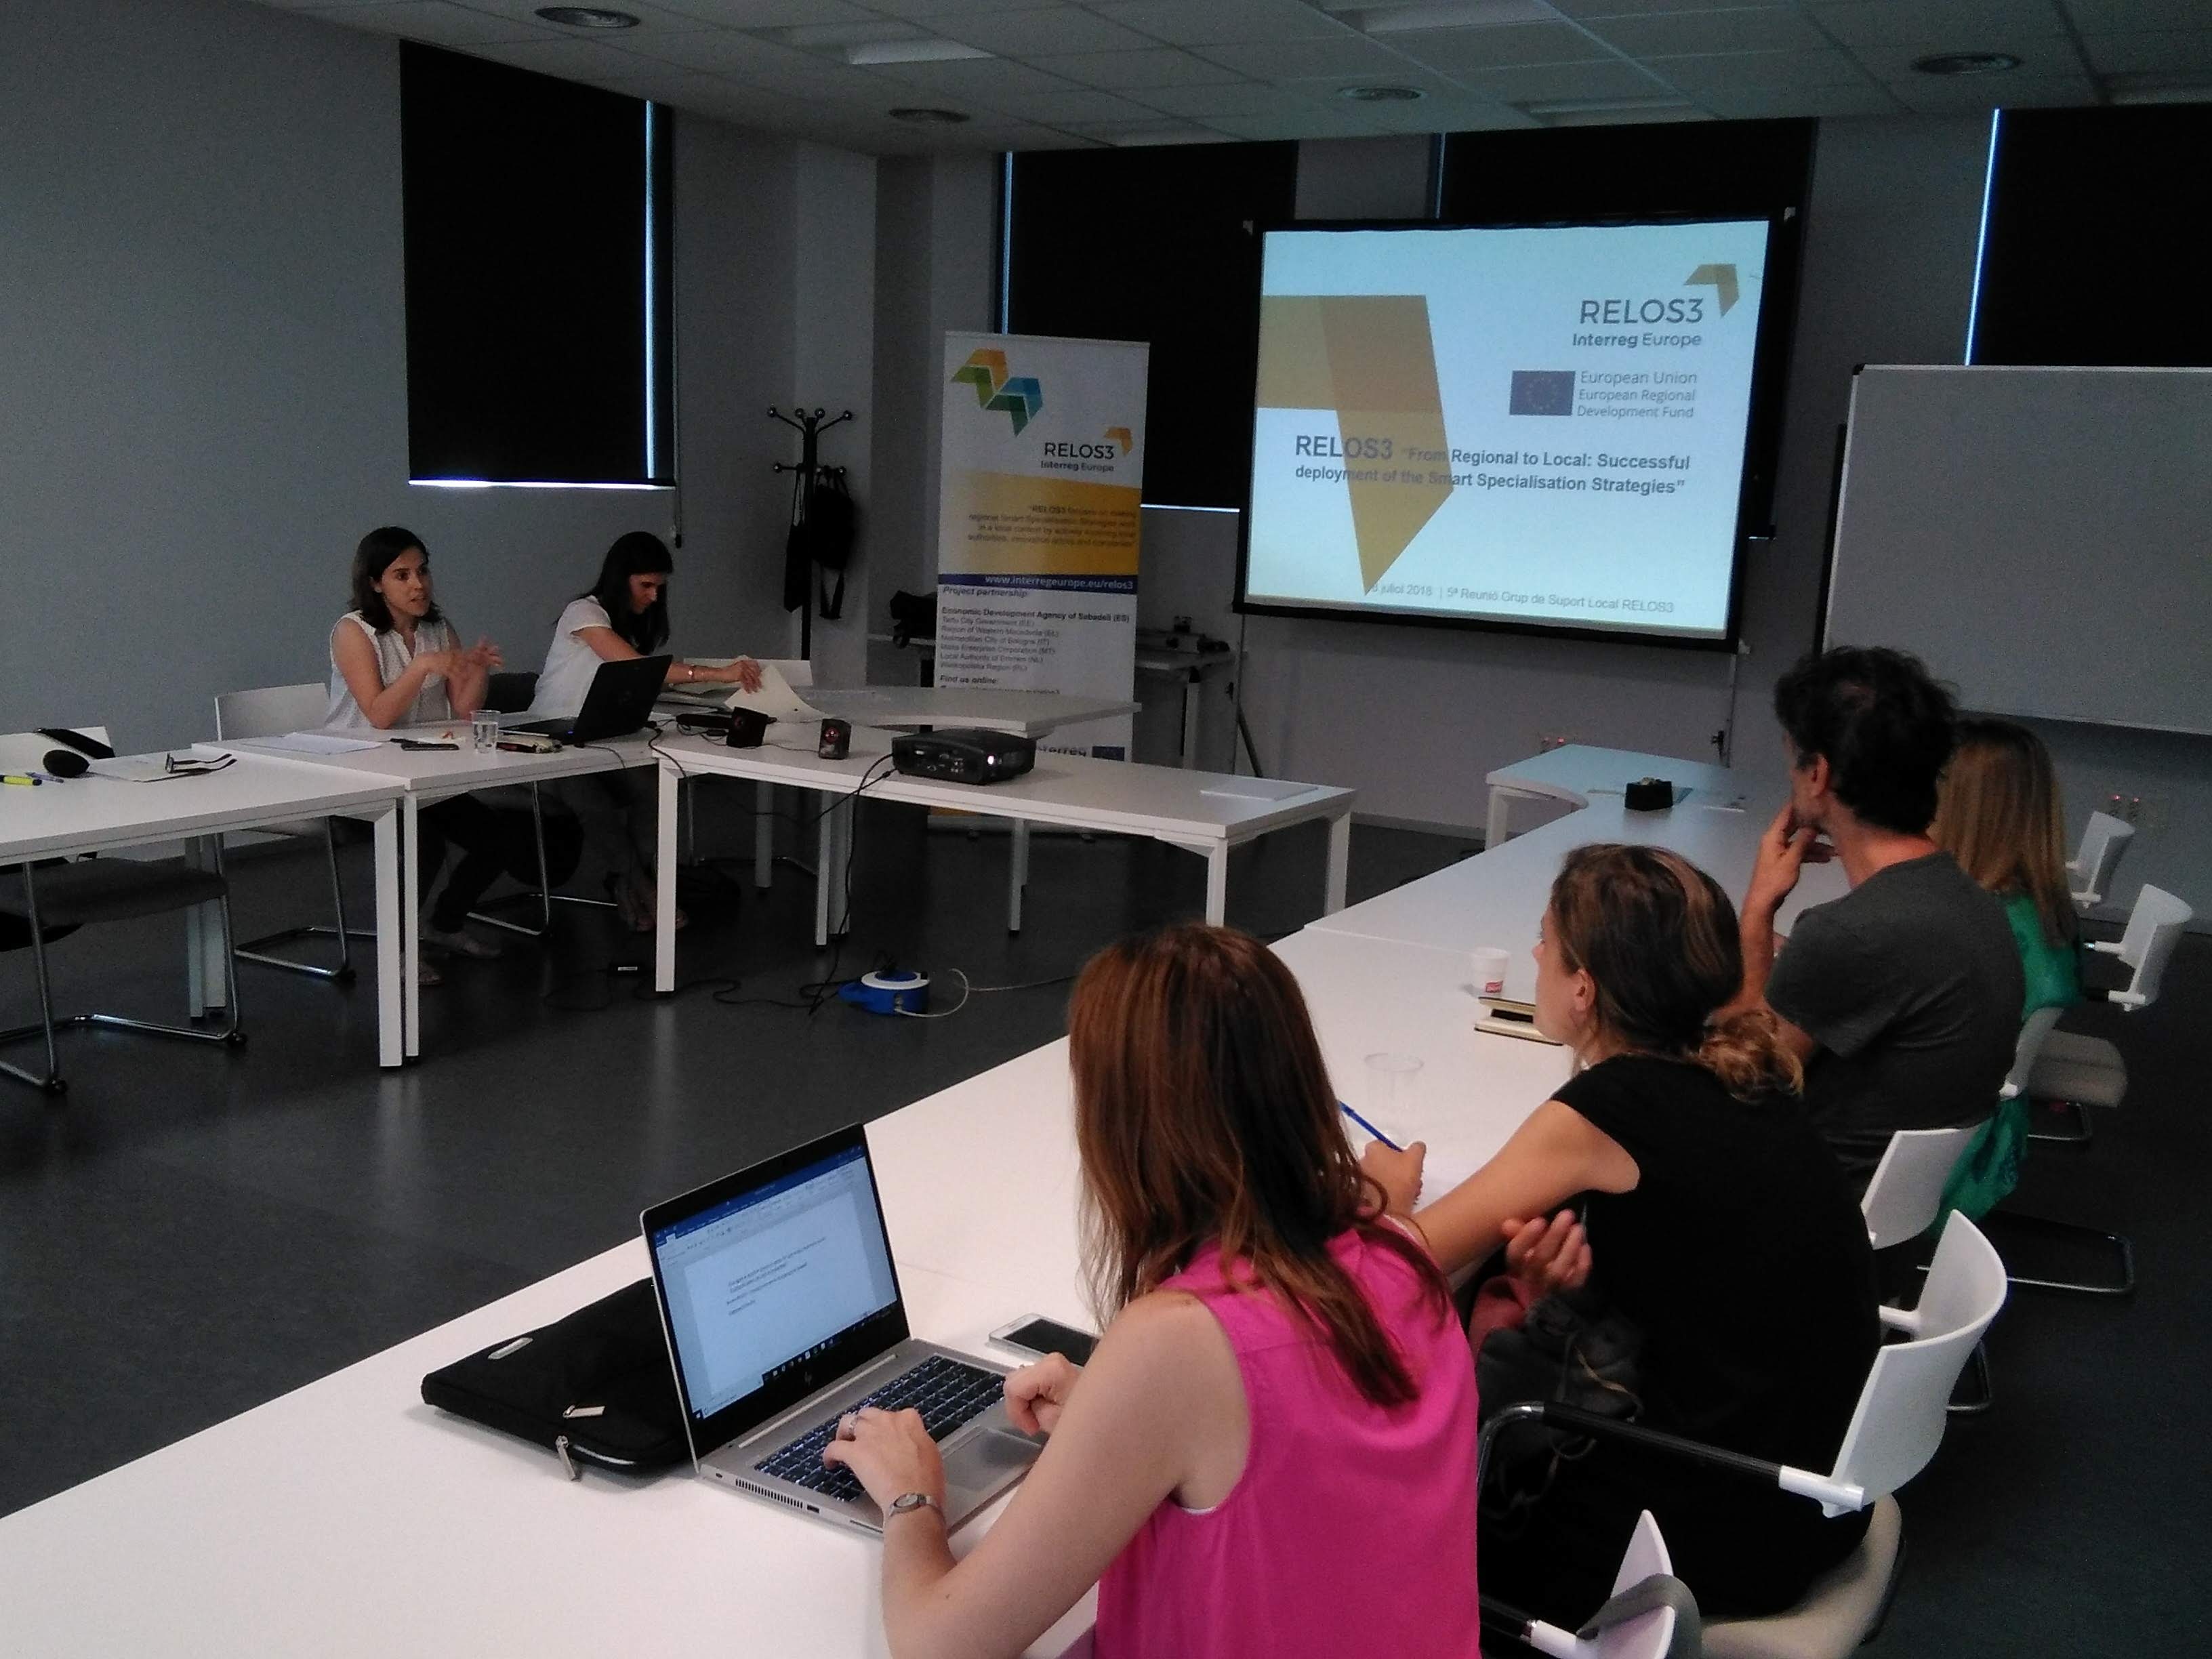 Fifth Stakeholders' Meeting in Sabadell